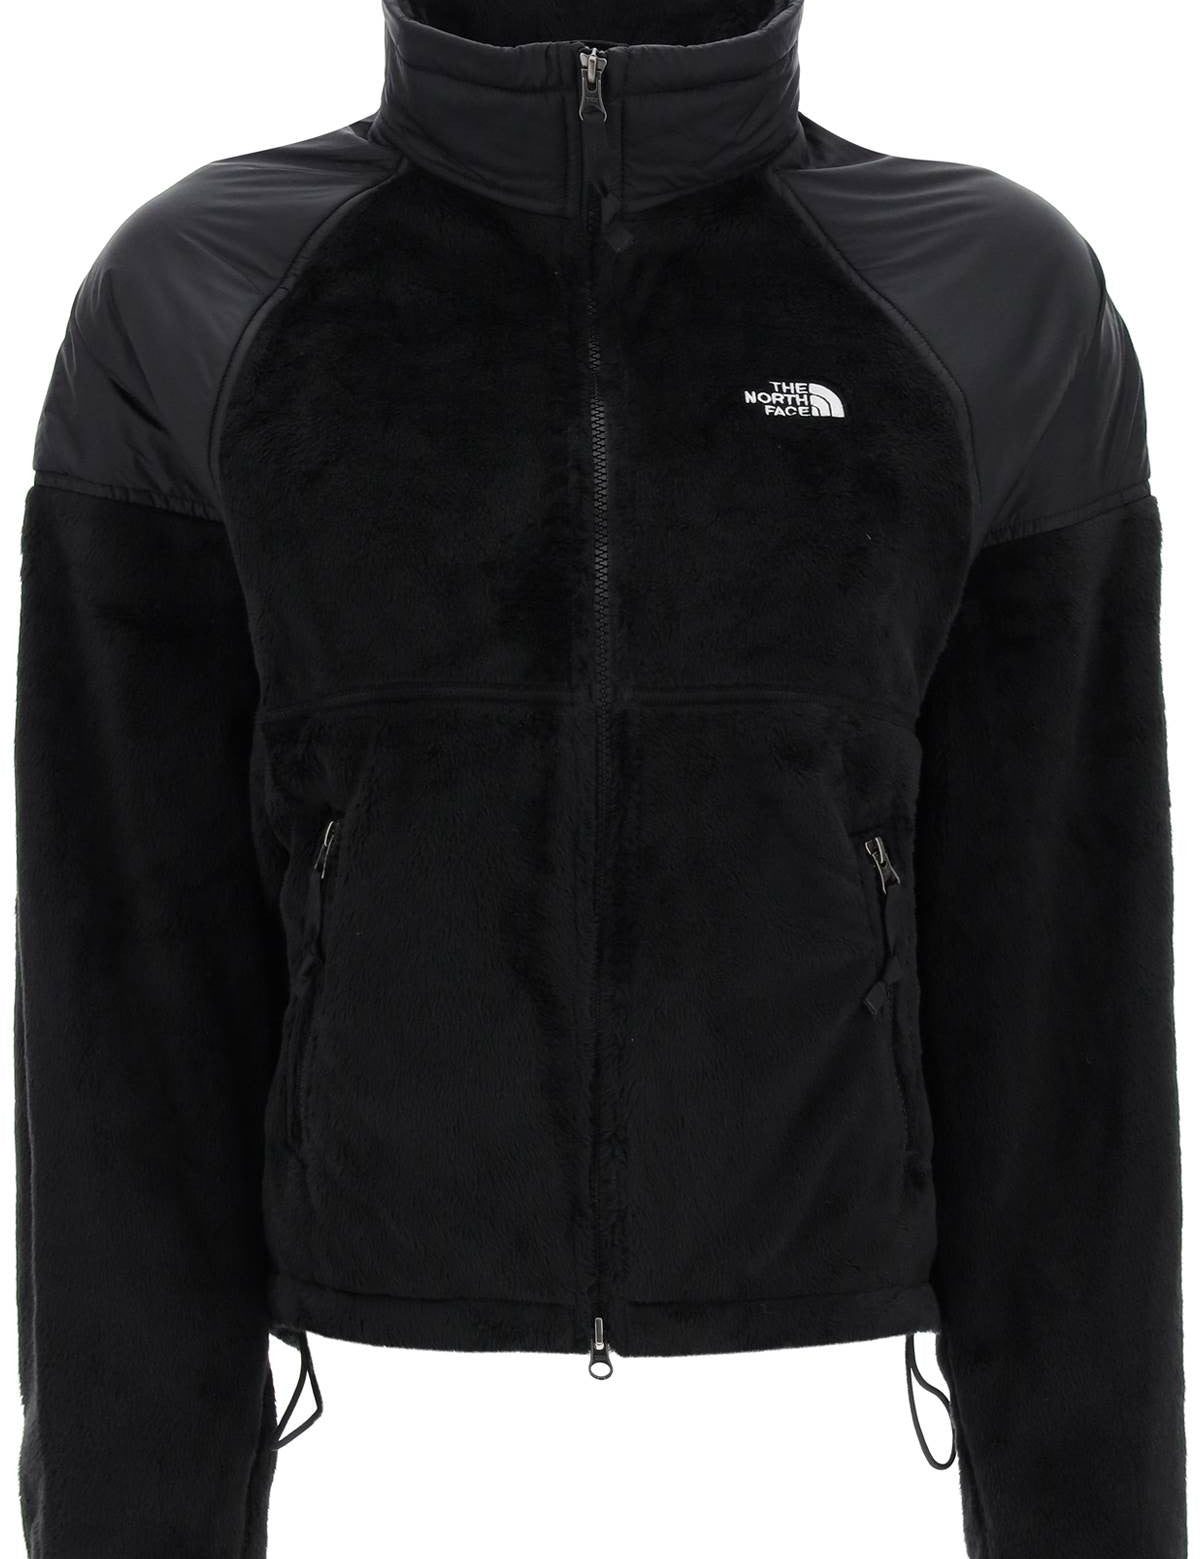 the-north-face-versa-velour-jacket-in-recycled-fleece-and-risptop.jpg